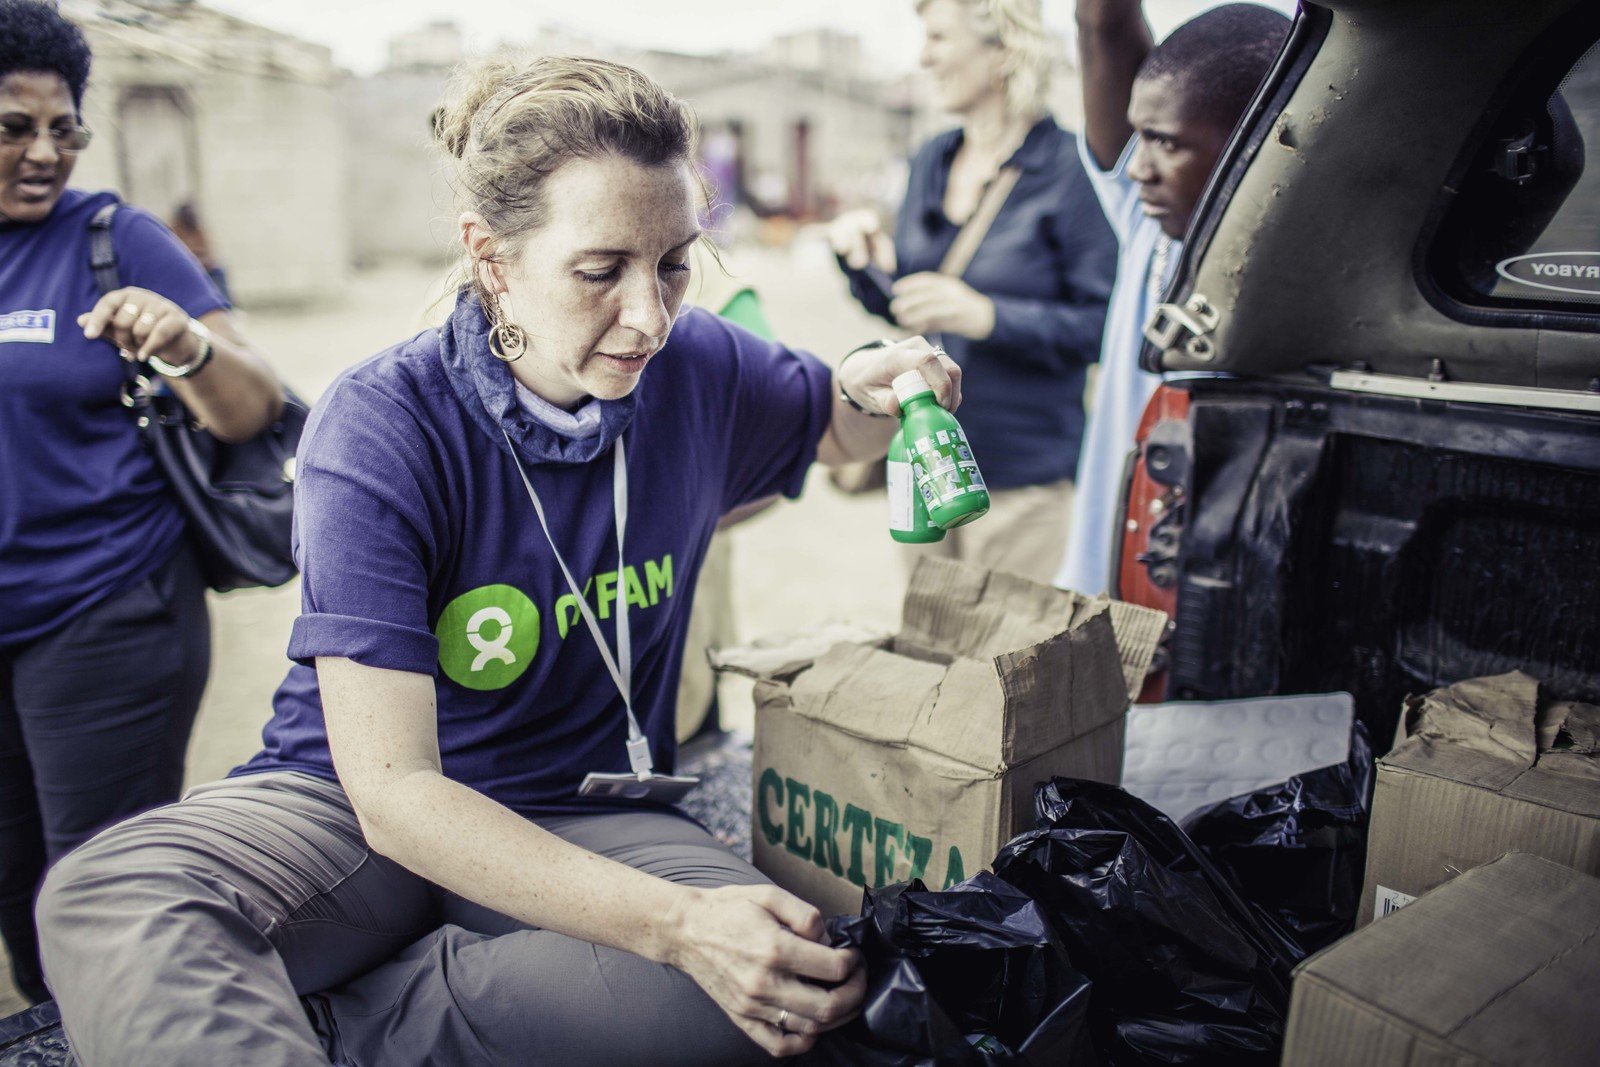 Michelle, public health promotion advisor, packing chlorine bottles for households in Mozambique. One drop will disinfect a jerry can of 20 litres of water. (Photo: Micas Mondlane / Oxfam Novib)